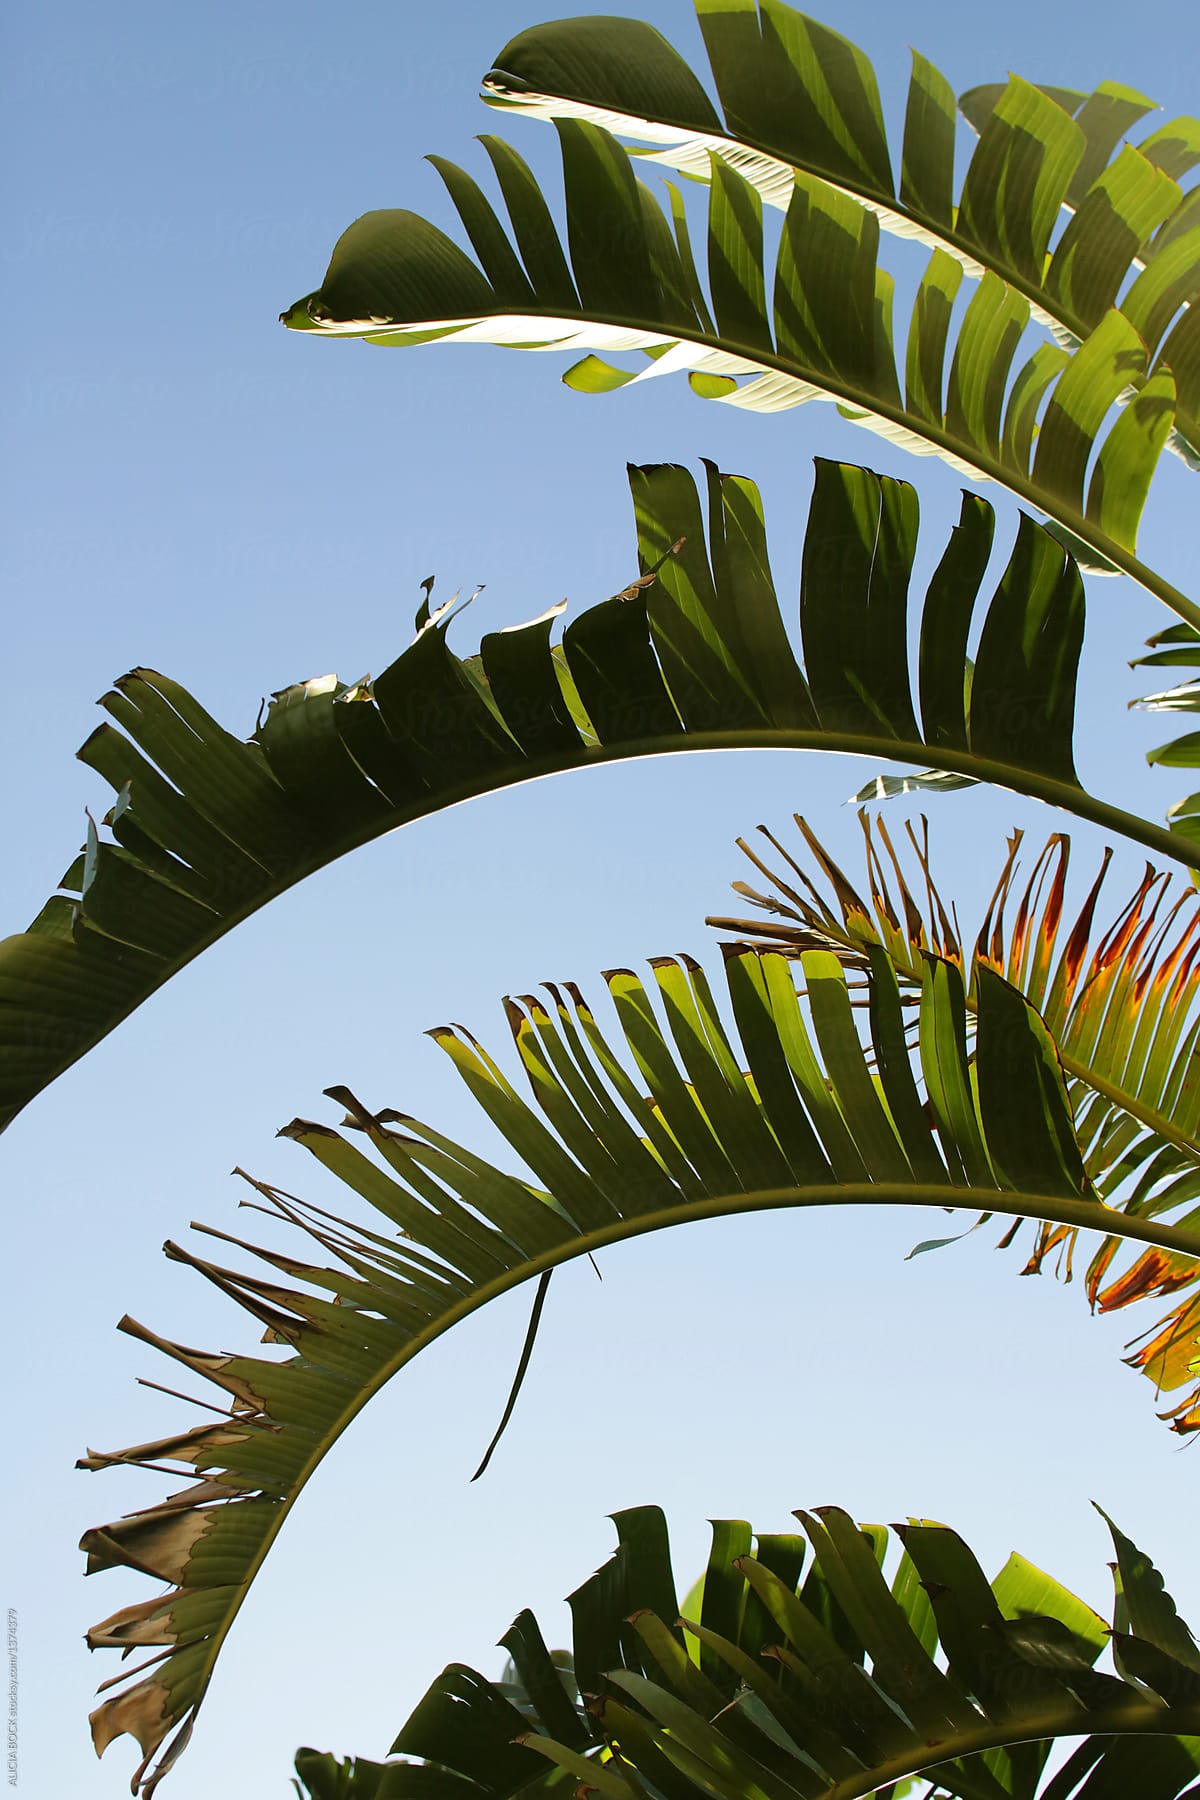 Large Banana Leaves Against A Bright Blue Sky